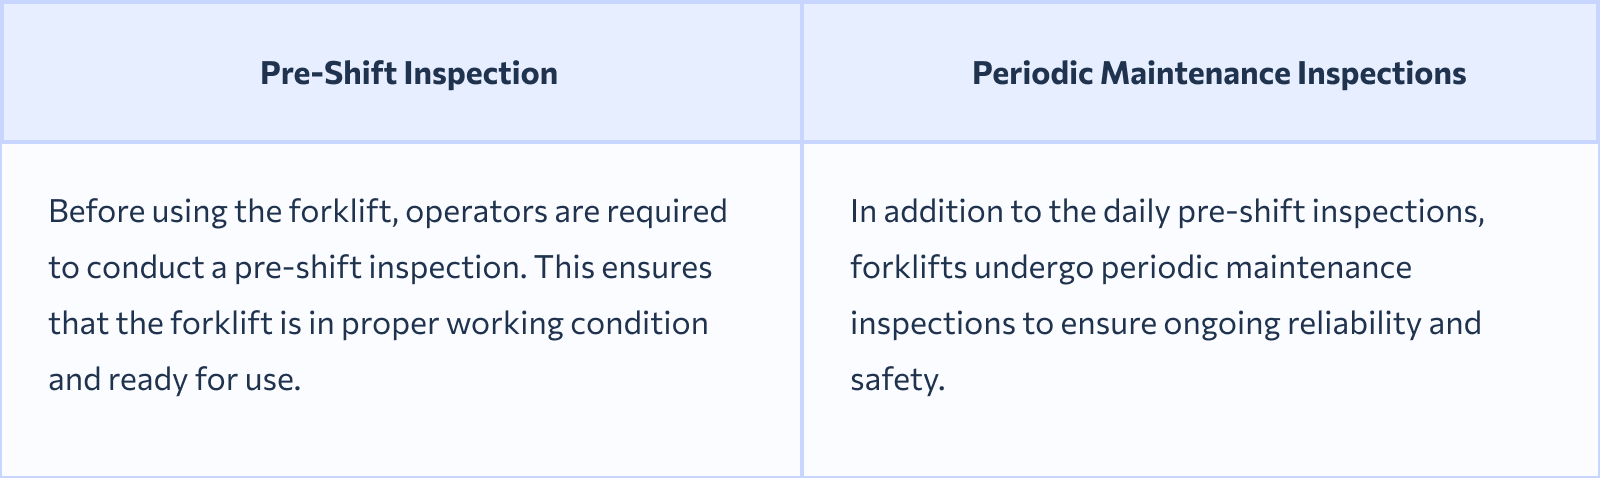 two types of inspections